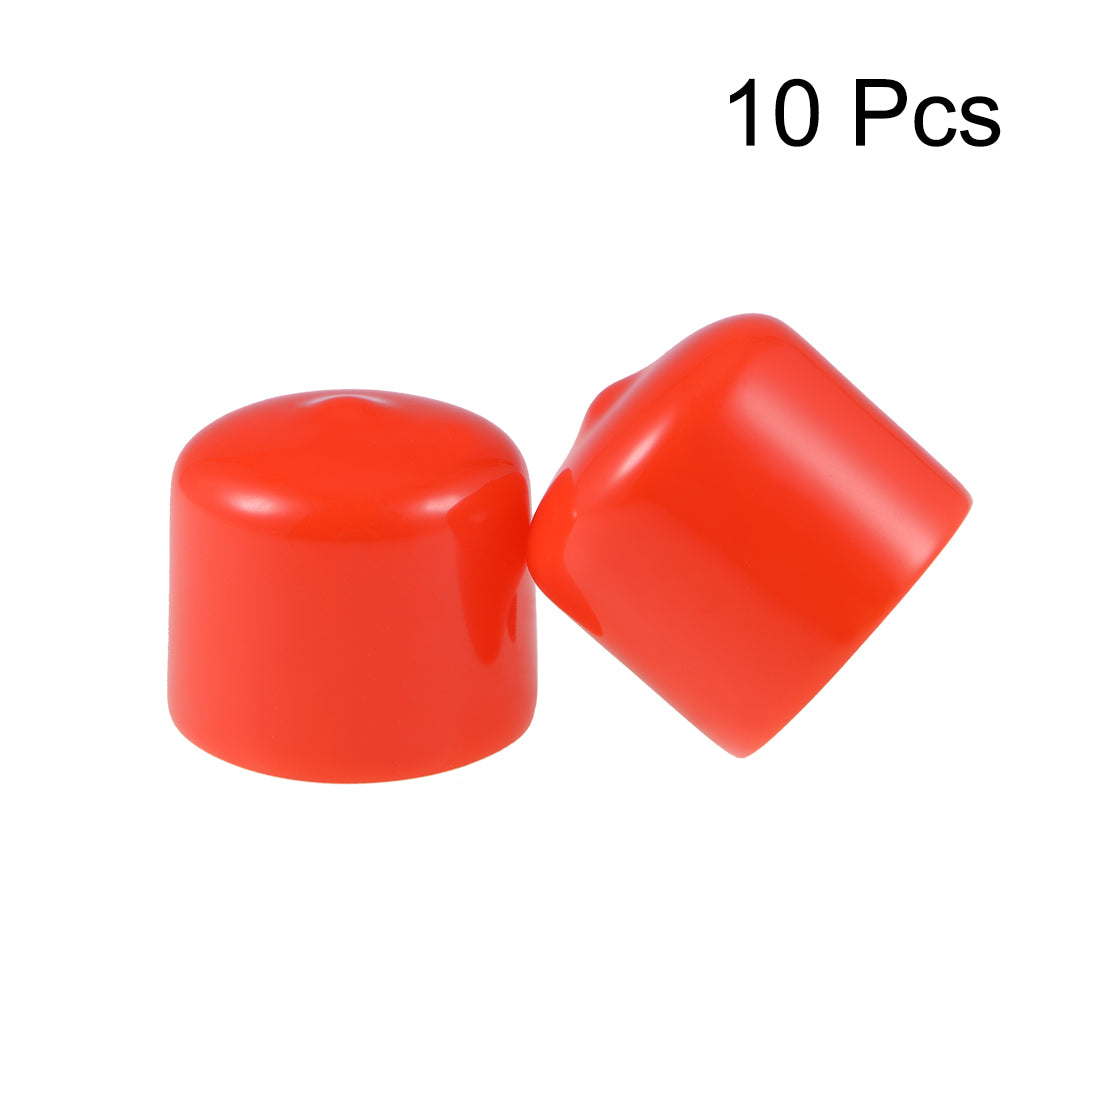 uxcell Uxcell Screw Thread Protector, 24mm ID Round End Cap Cover Red Tube Caps 10pcs